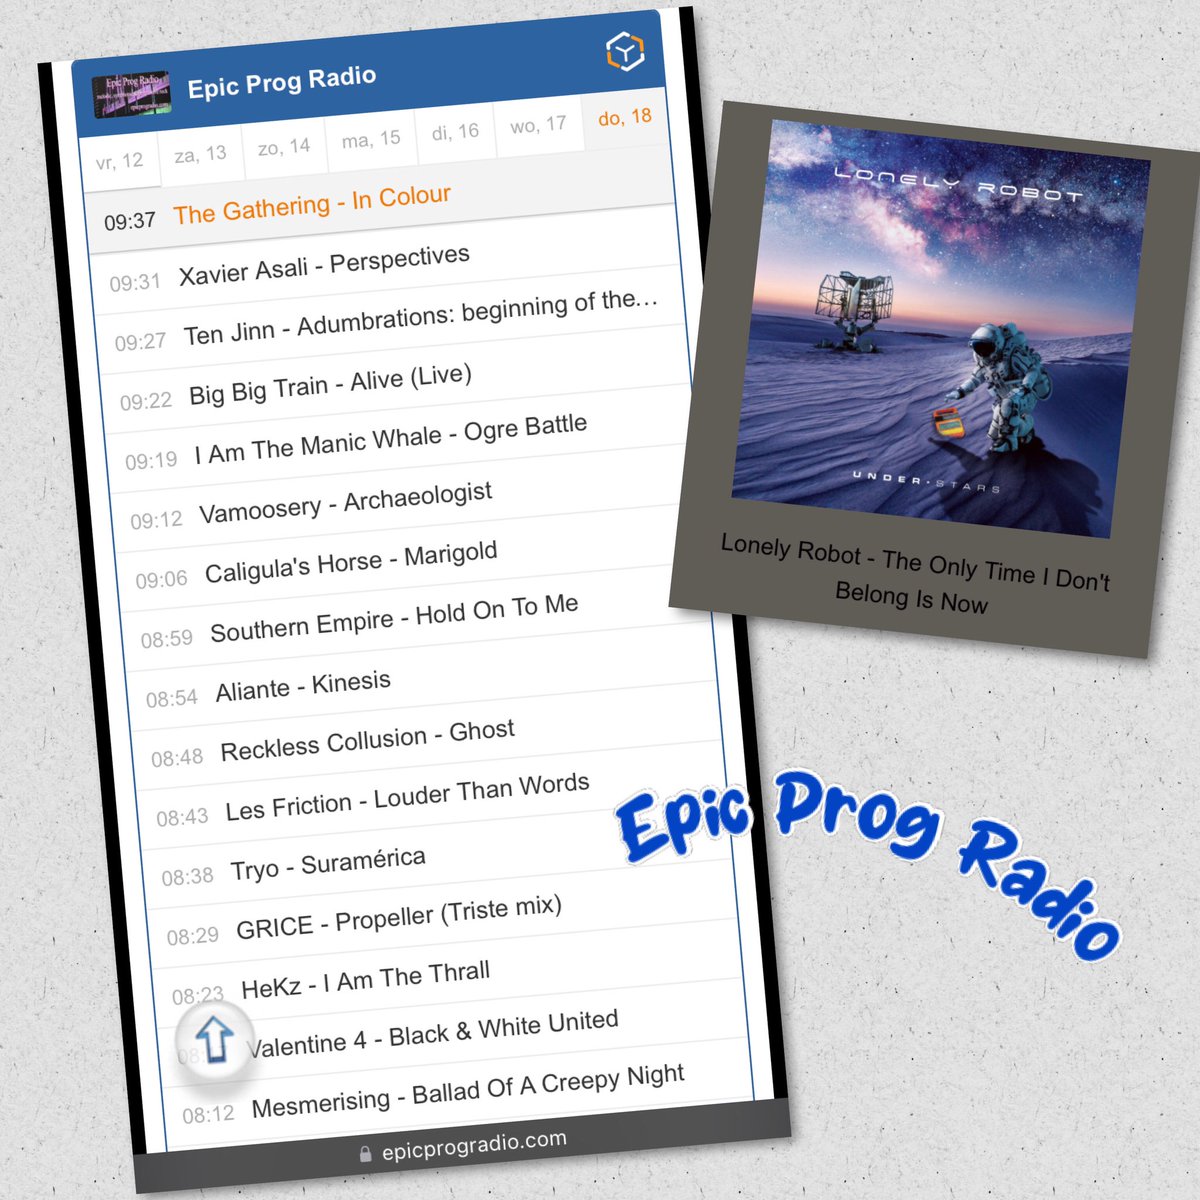 The music on Epic Prog Radio

fra-pioneer08.dedicateware.com:3255/stream

Follow on facebook, twitter and instagram @epicprogradio

Music submission…. send a email to epicprogradio@gmail.com

linktr.ee/epicprogradio

#progressiverock #progrock #neoprog  #rockprogressif #independentmusic #newprog